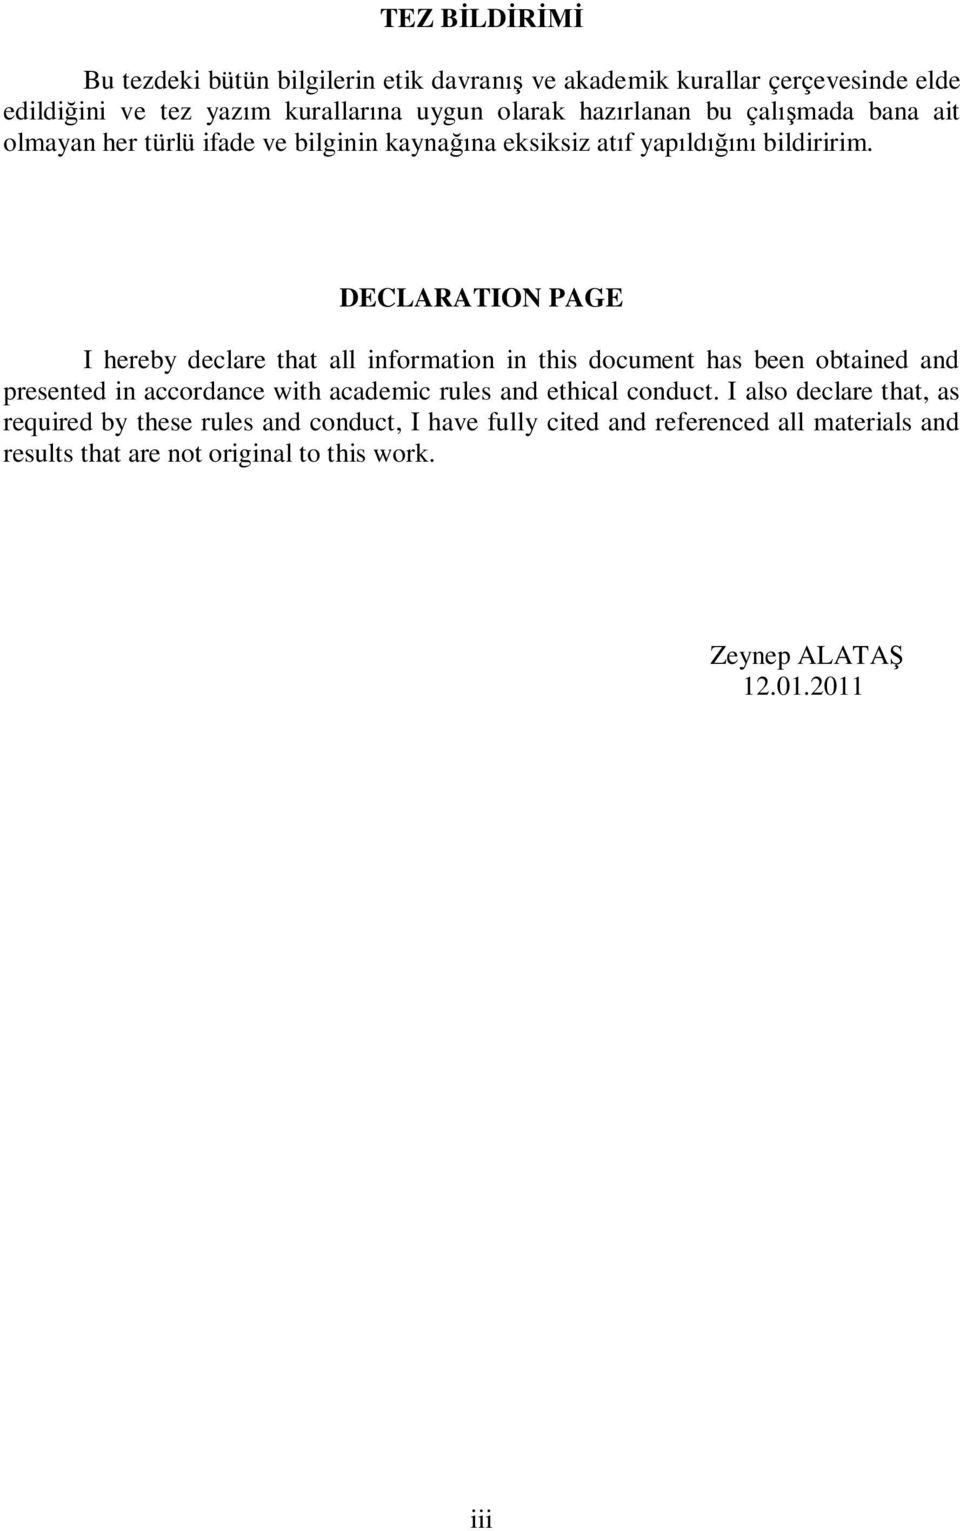 DECLARATION PAGE I hereby declare that all information in this document has been obtained and presented in accordance with academic rules and